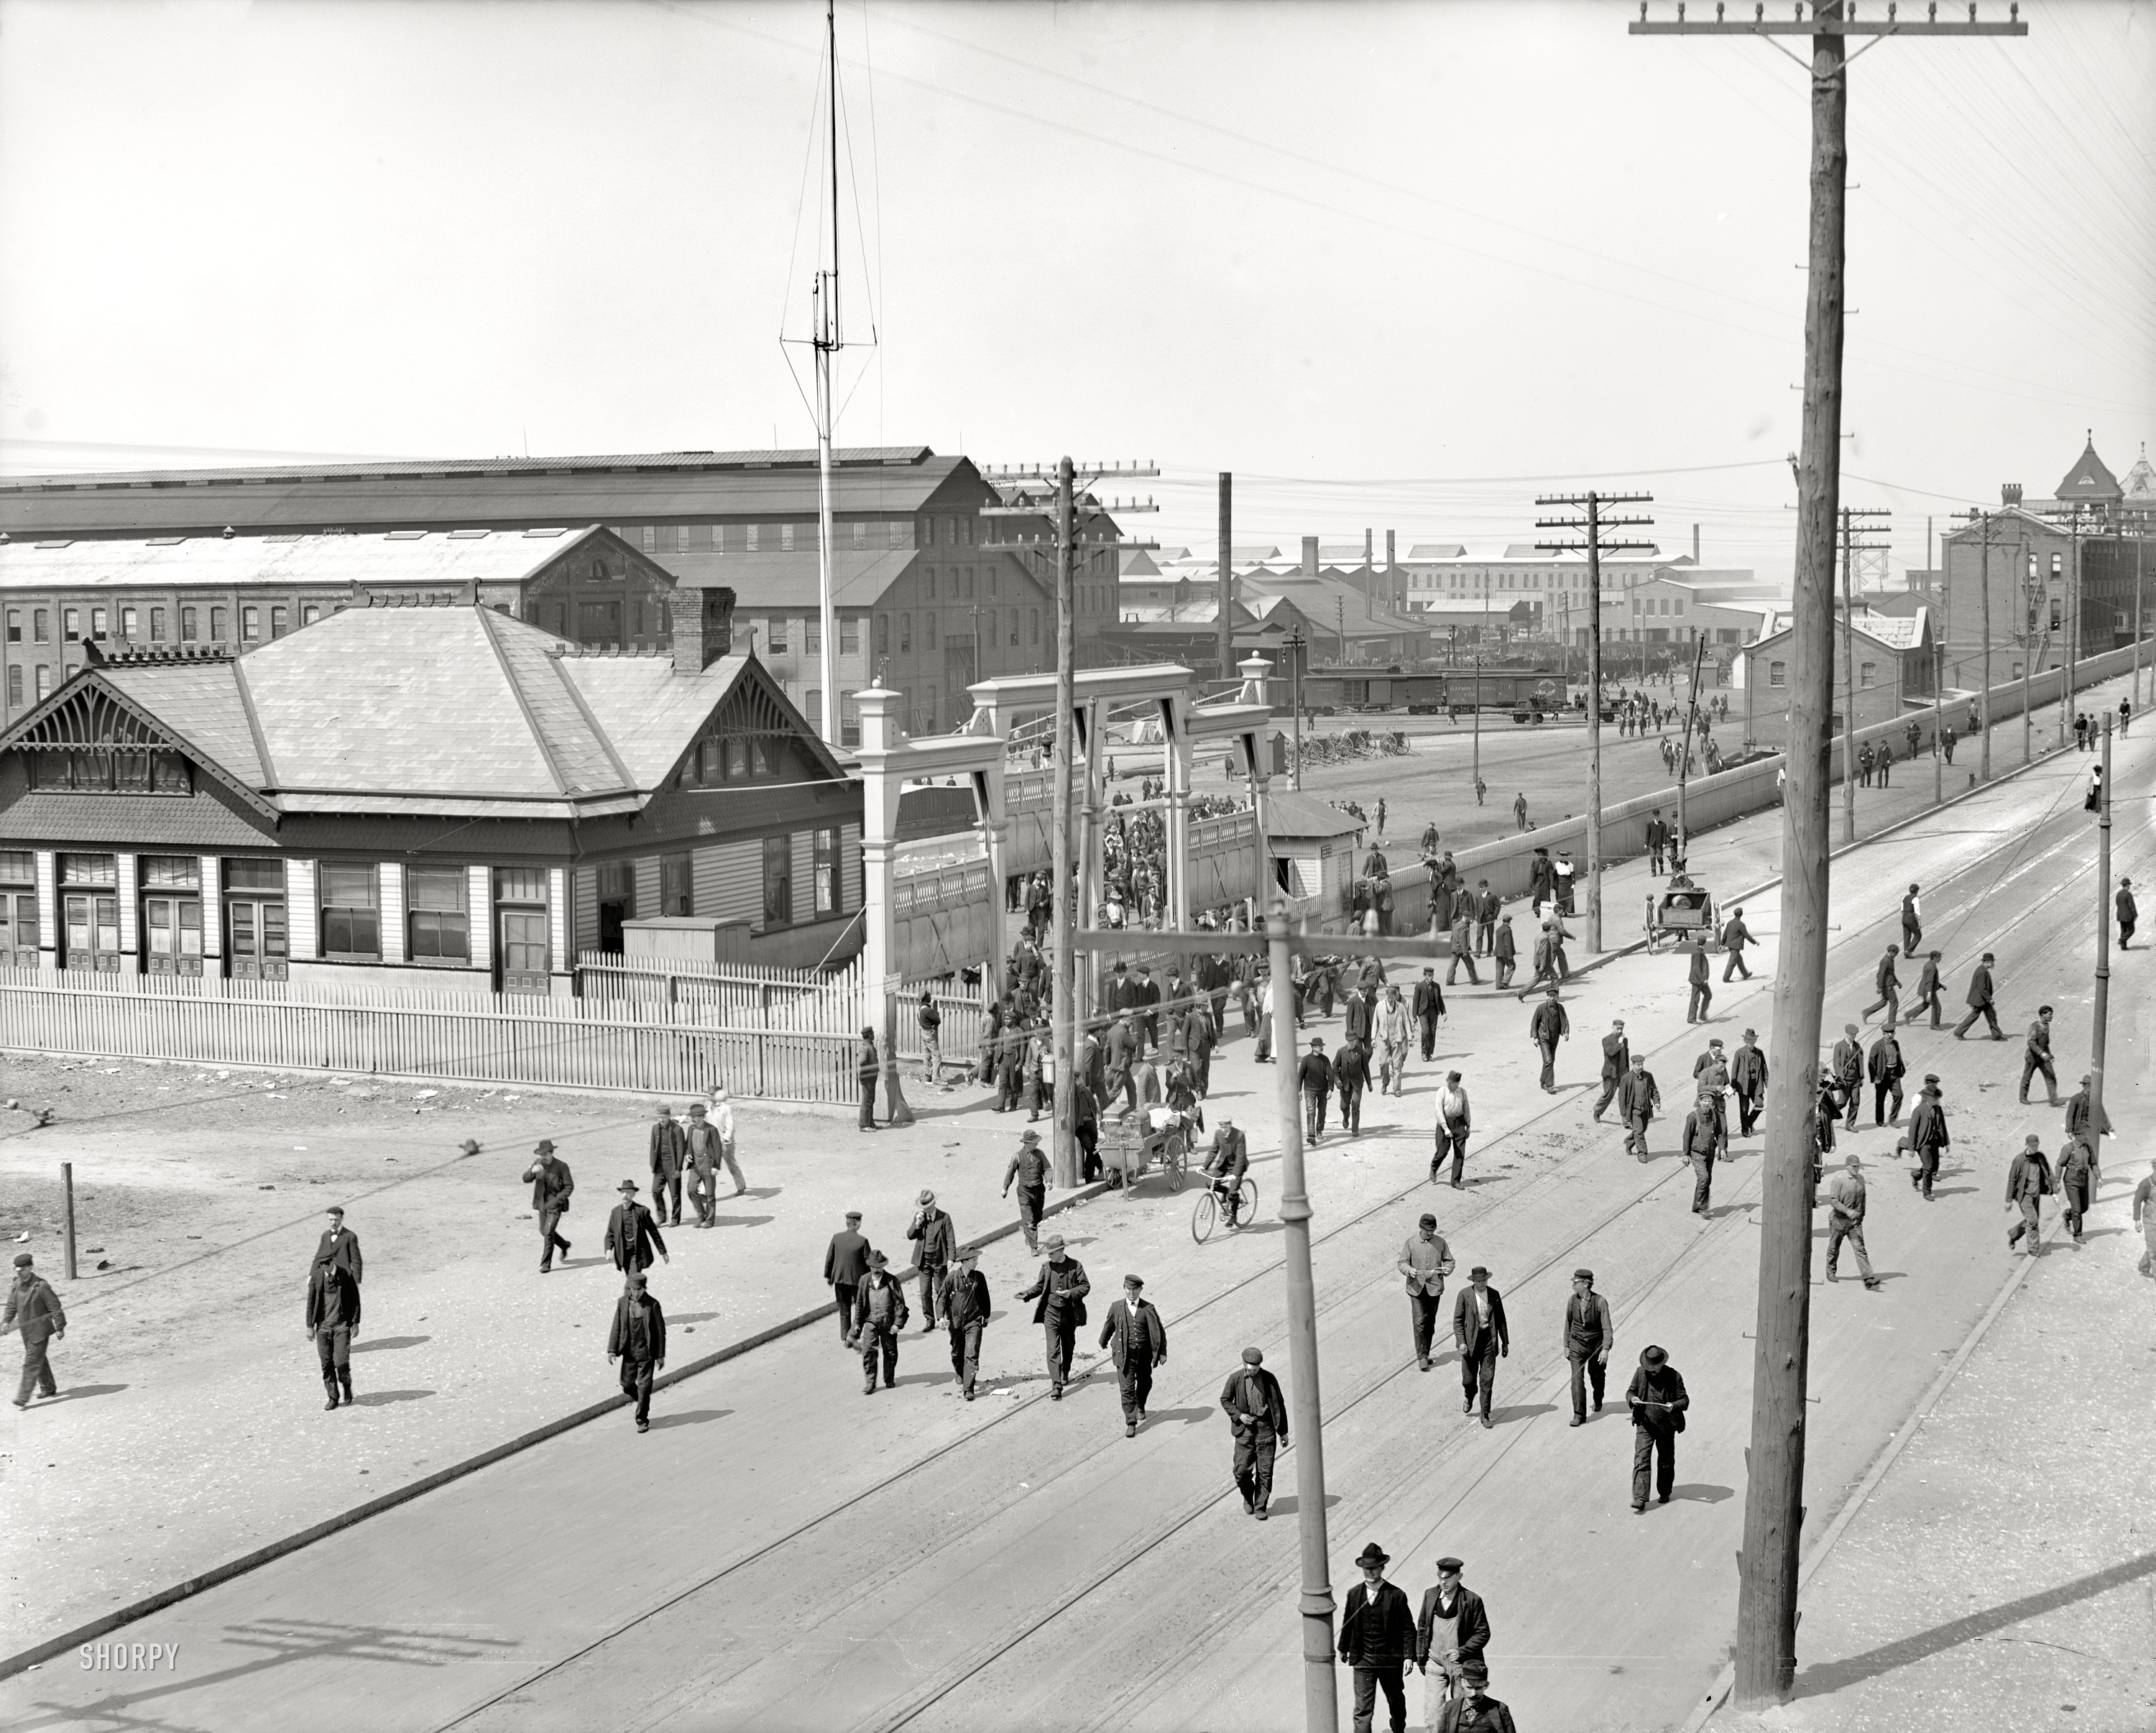 Newport News, Virginia, circa 1905. "Noon hour at the shipyard." 8x10 inch dry plate glass negative, Detroit Publishing Company. View full size.